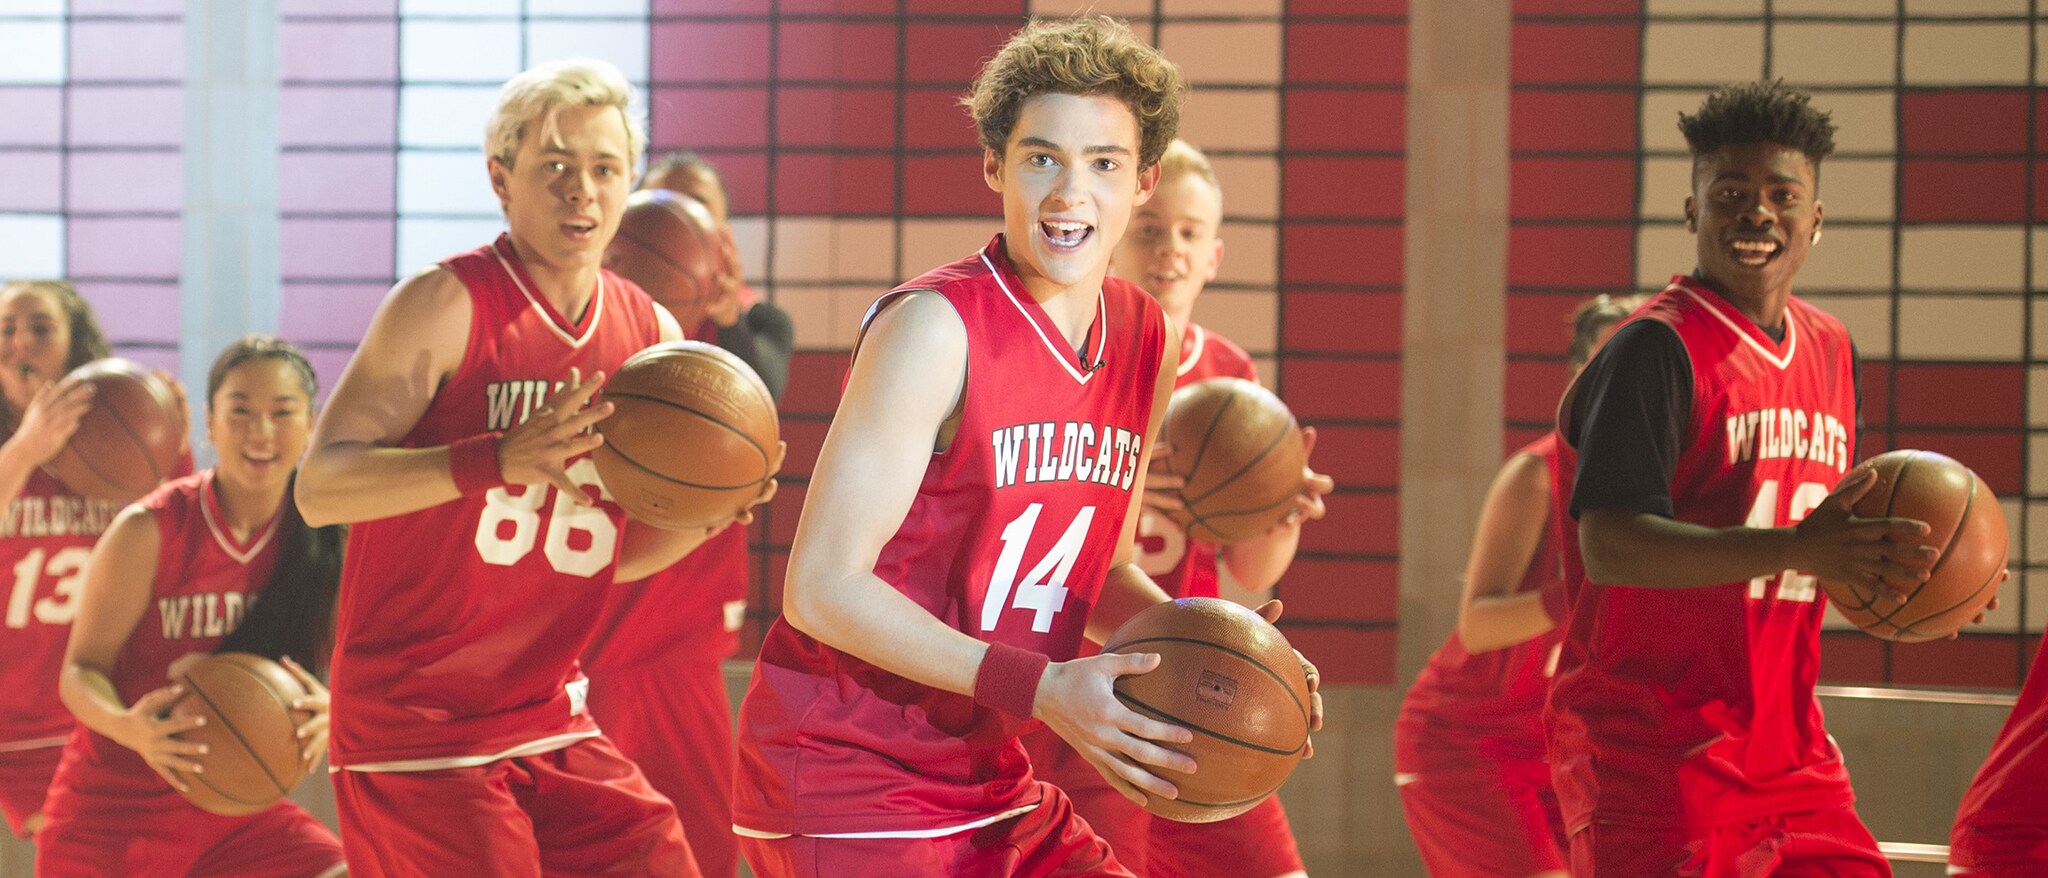  High School Musical: The Musical: The Series (Season One) - Featured Content Banner